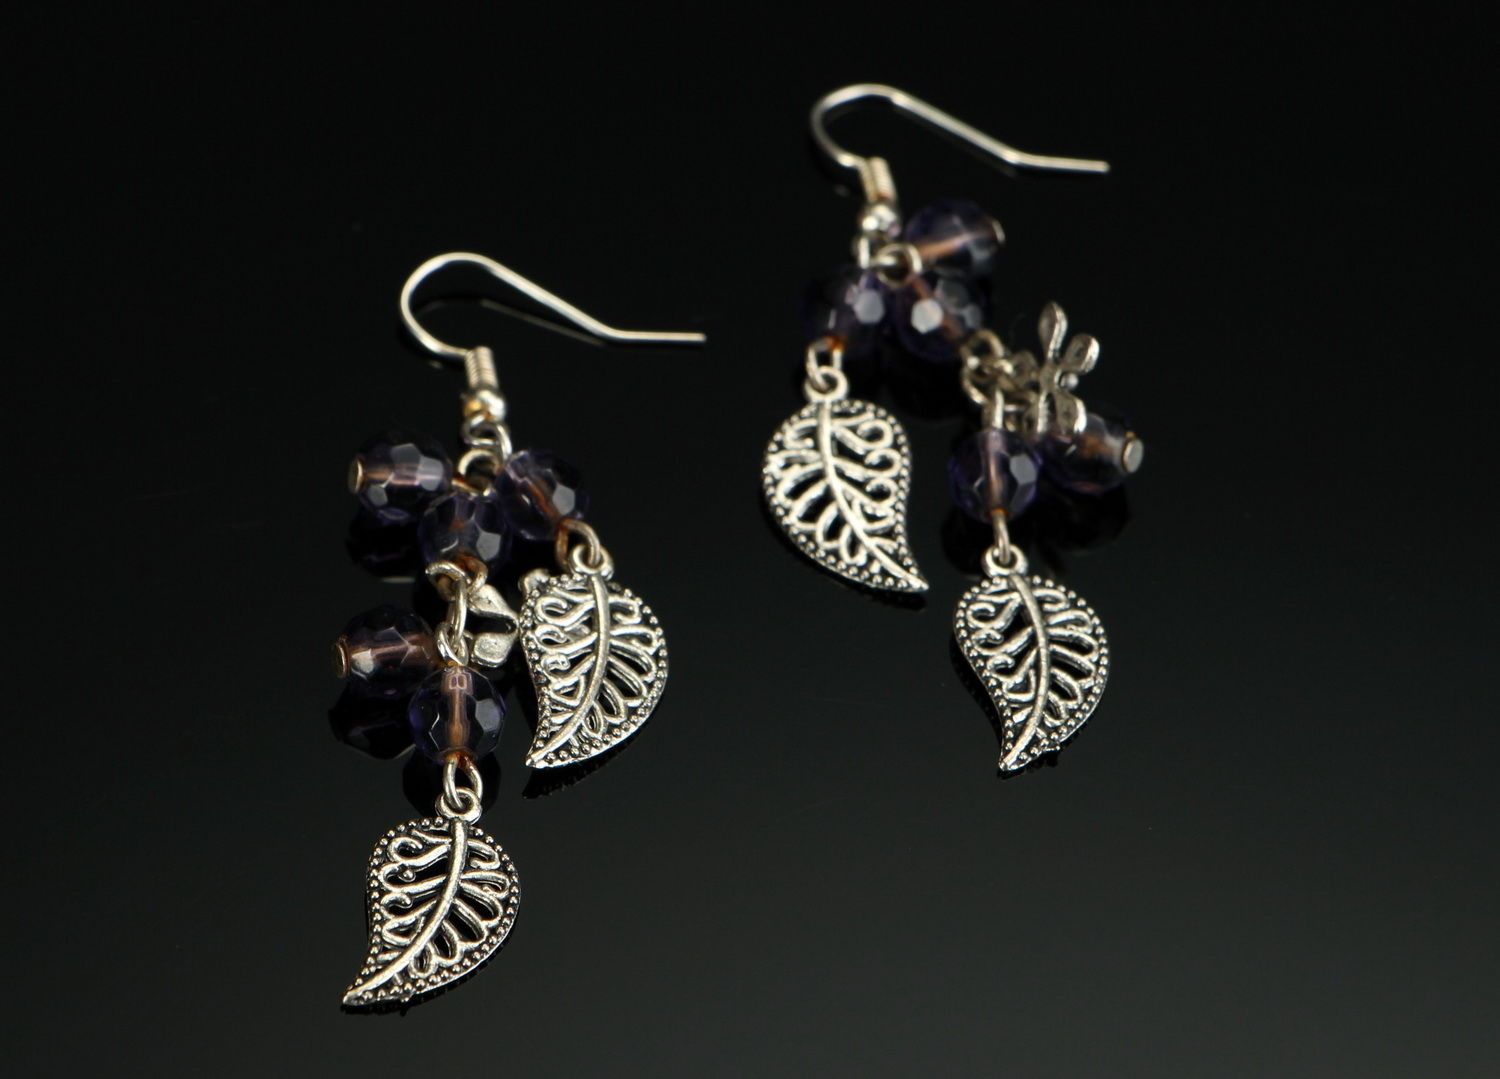 Earrings made of steel and glass Currant berries photo 2